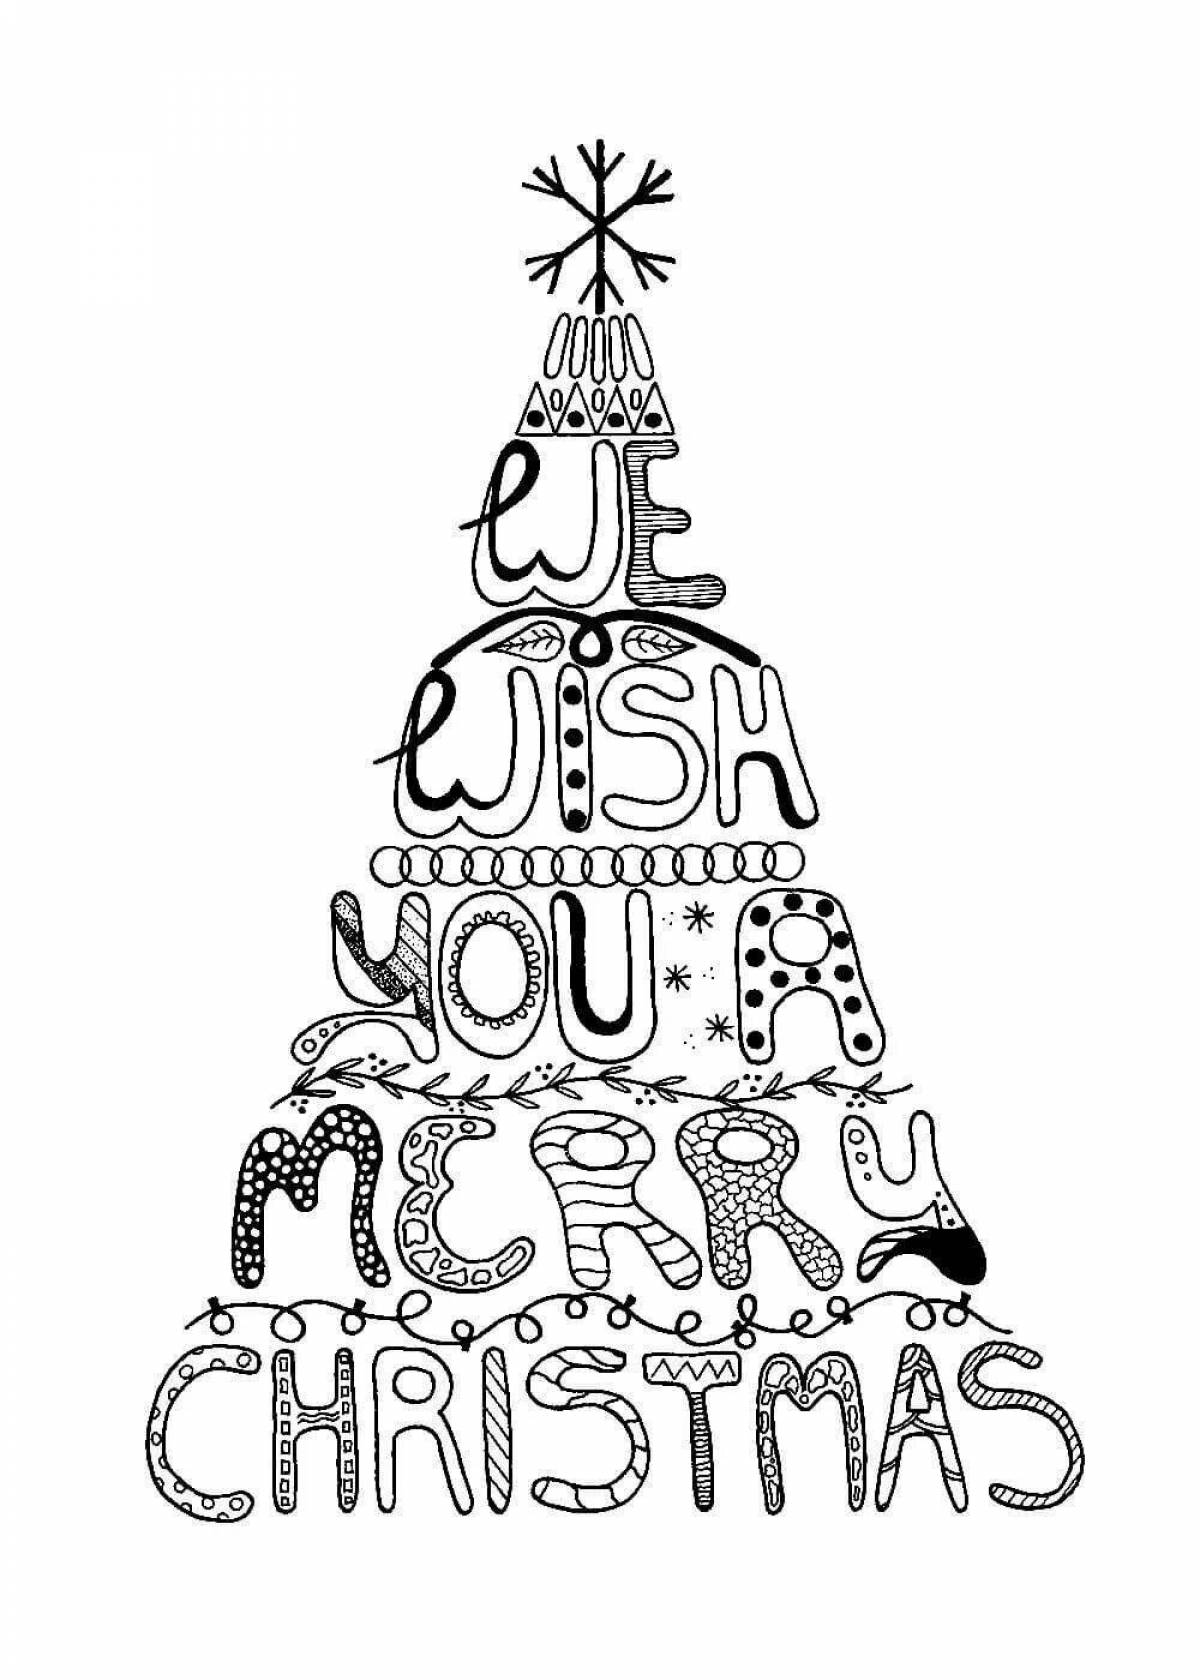 Large merry christmas and happy new year coloring book